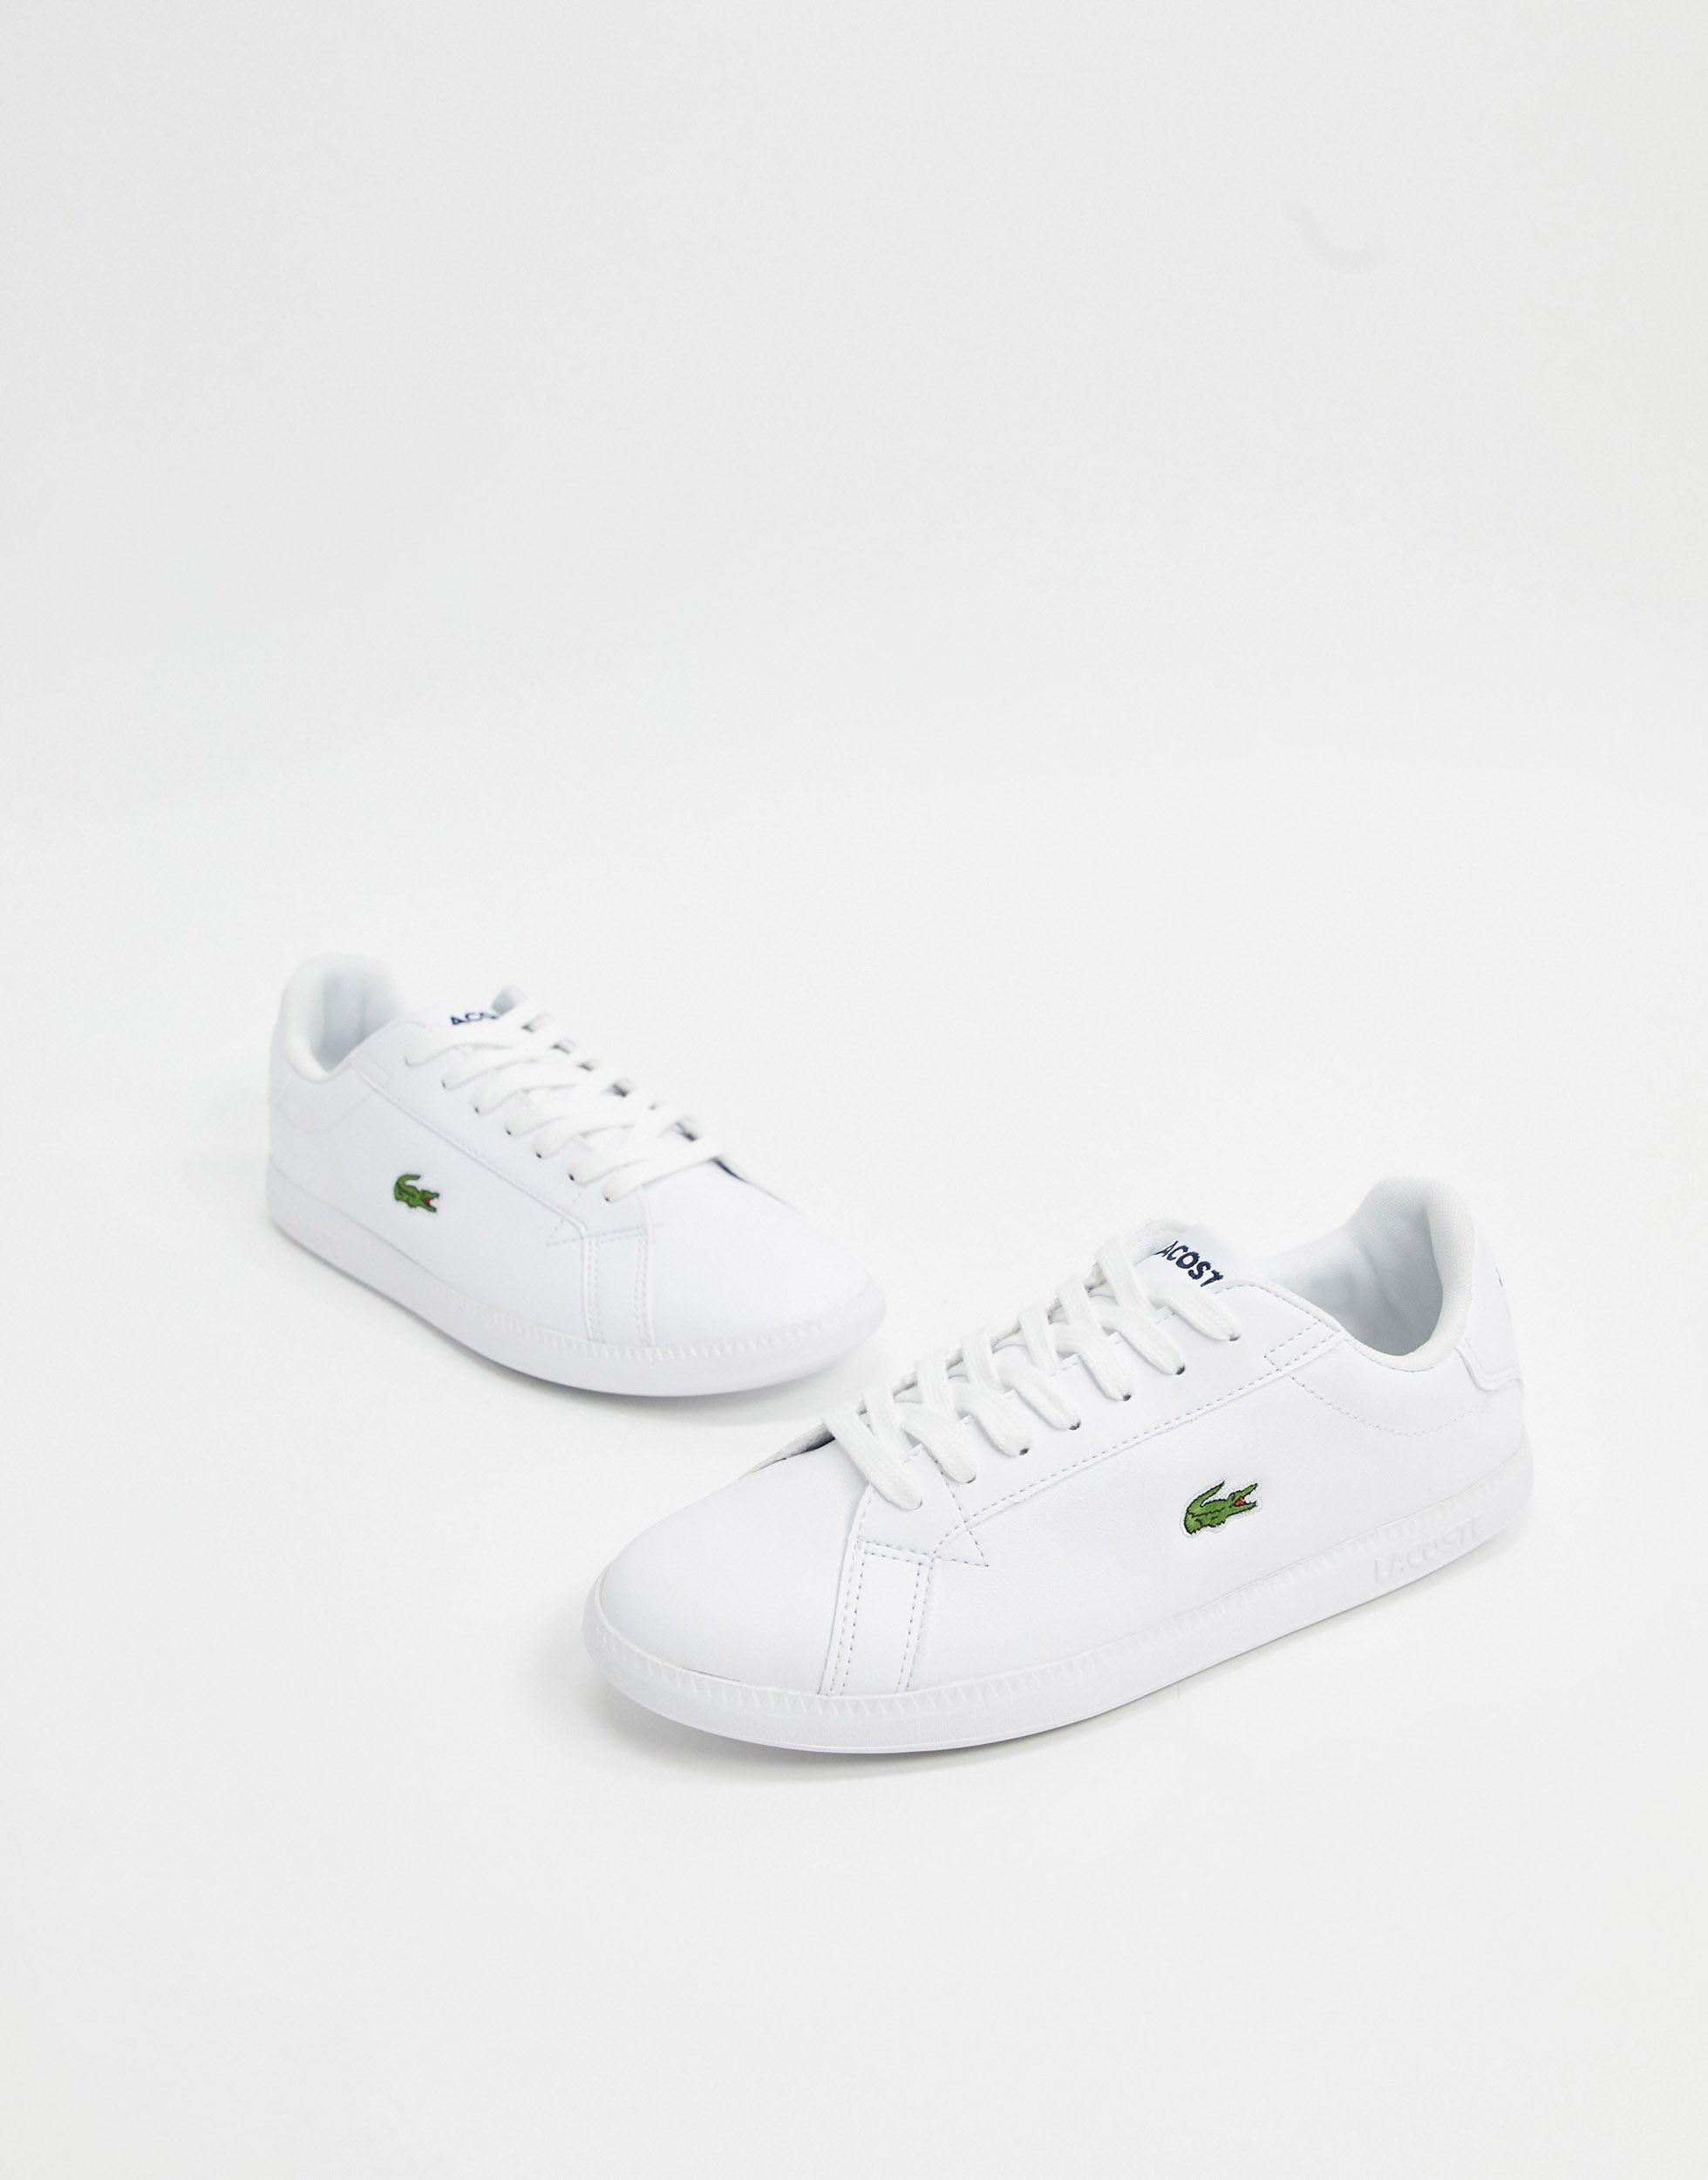 Lacoste Graduate Bl 1 Leather Trainers in White | Lyst